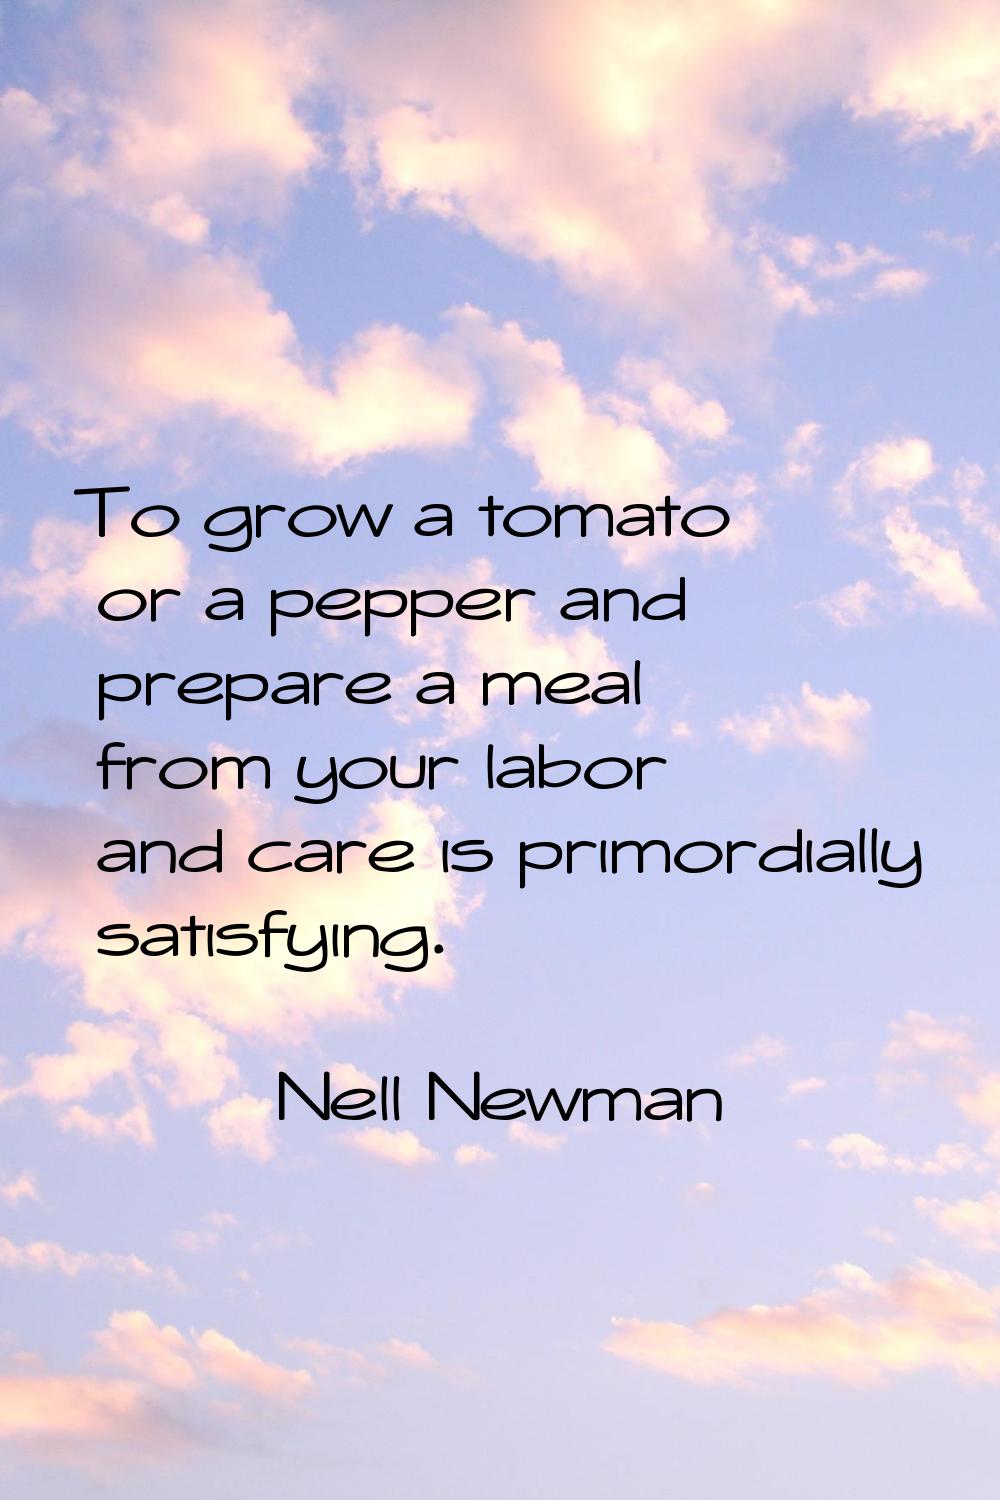 To grow a tomato or a pepper and prepare a meal from your labor and care is primordially satisfying